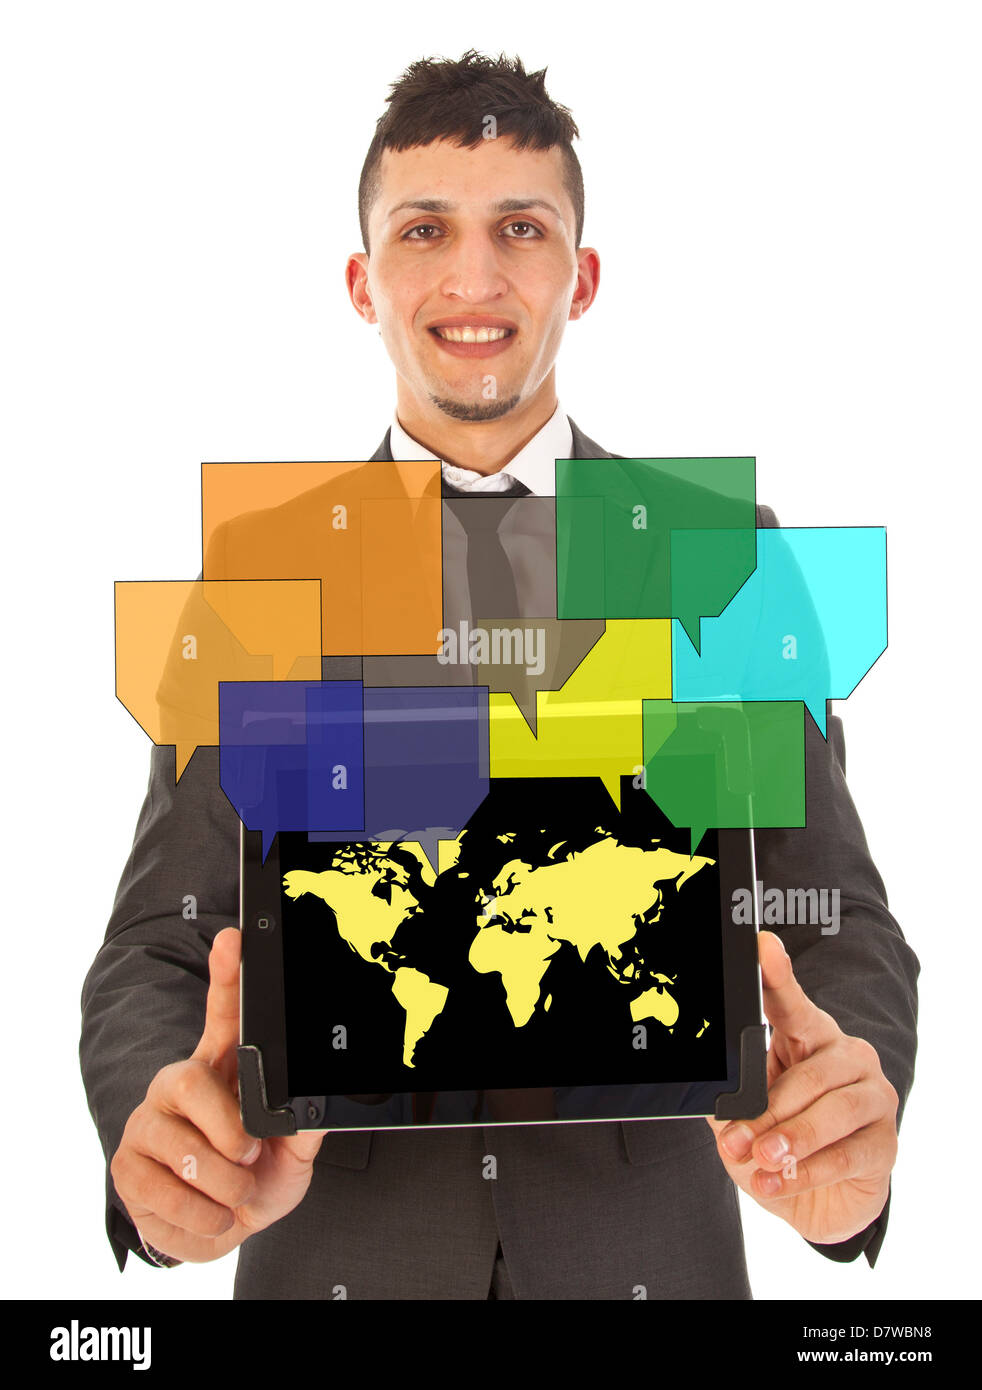 Young man holding tablet with online friends on world map Stock Photo